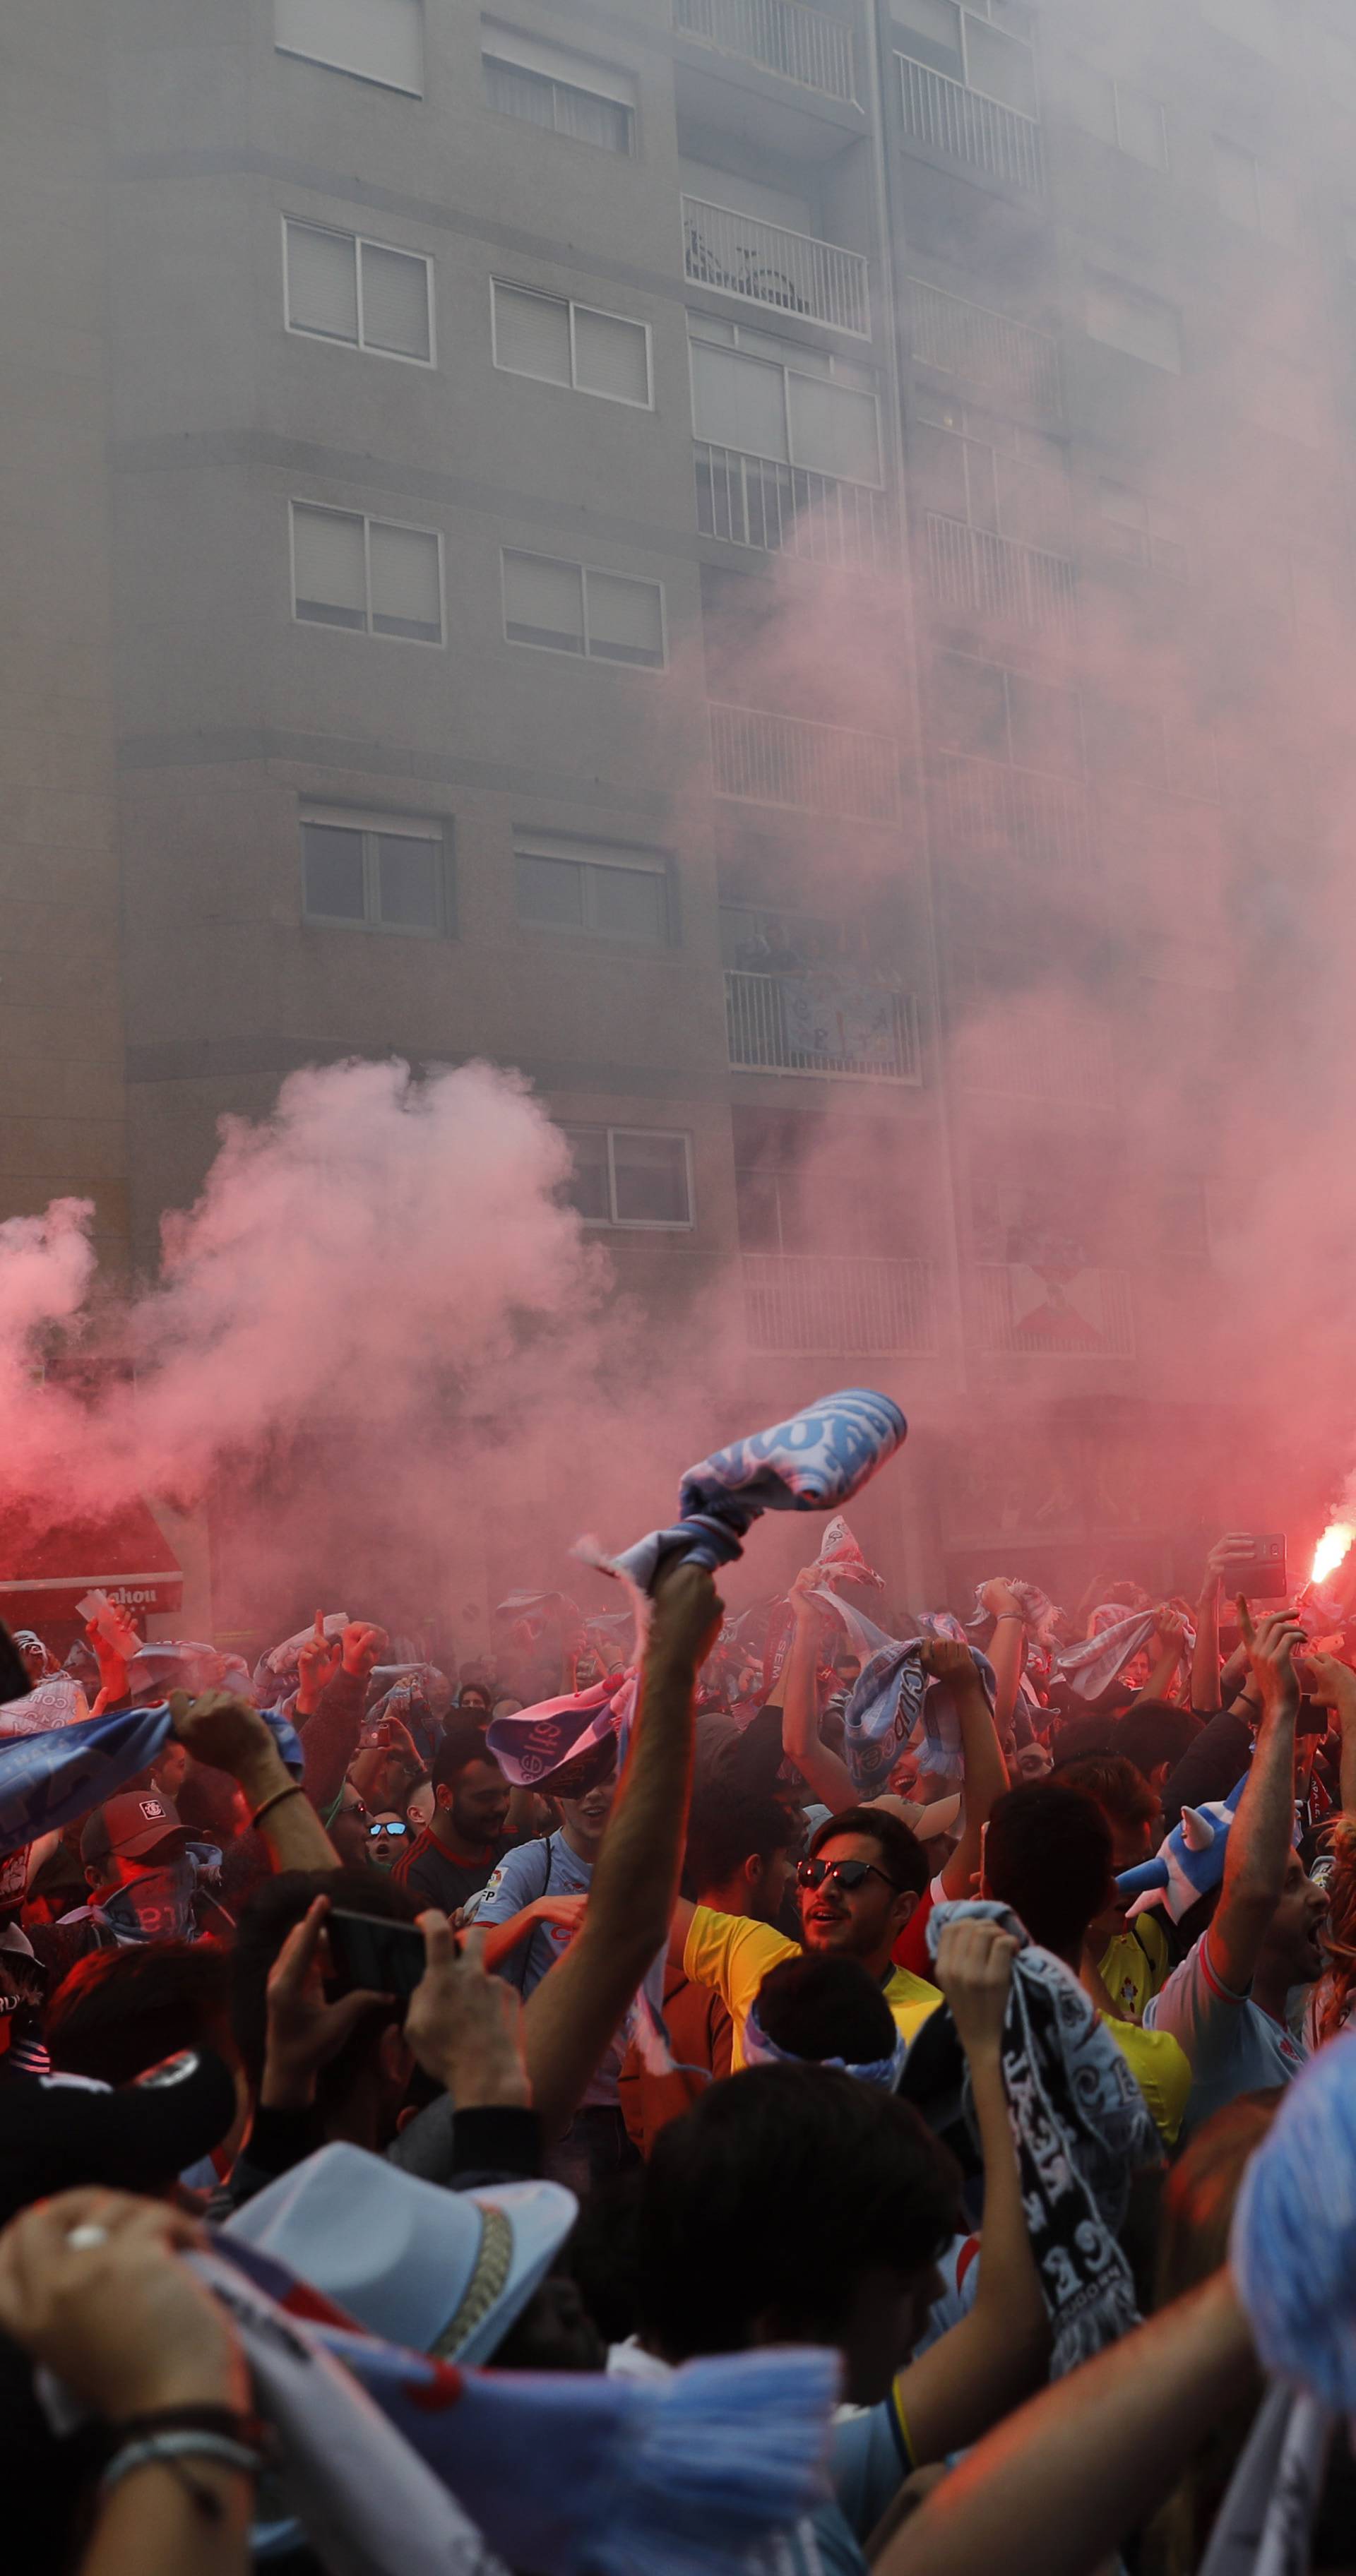 Fans outside the stadium before the match